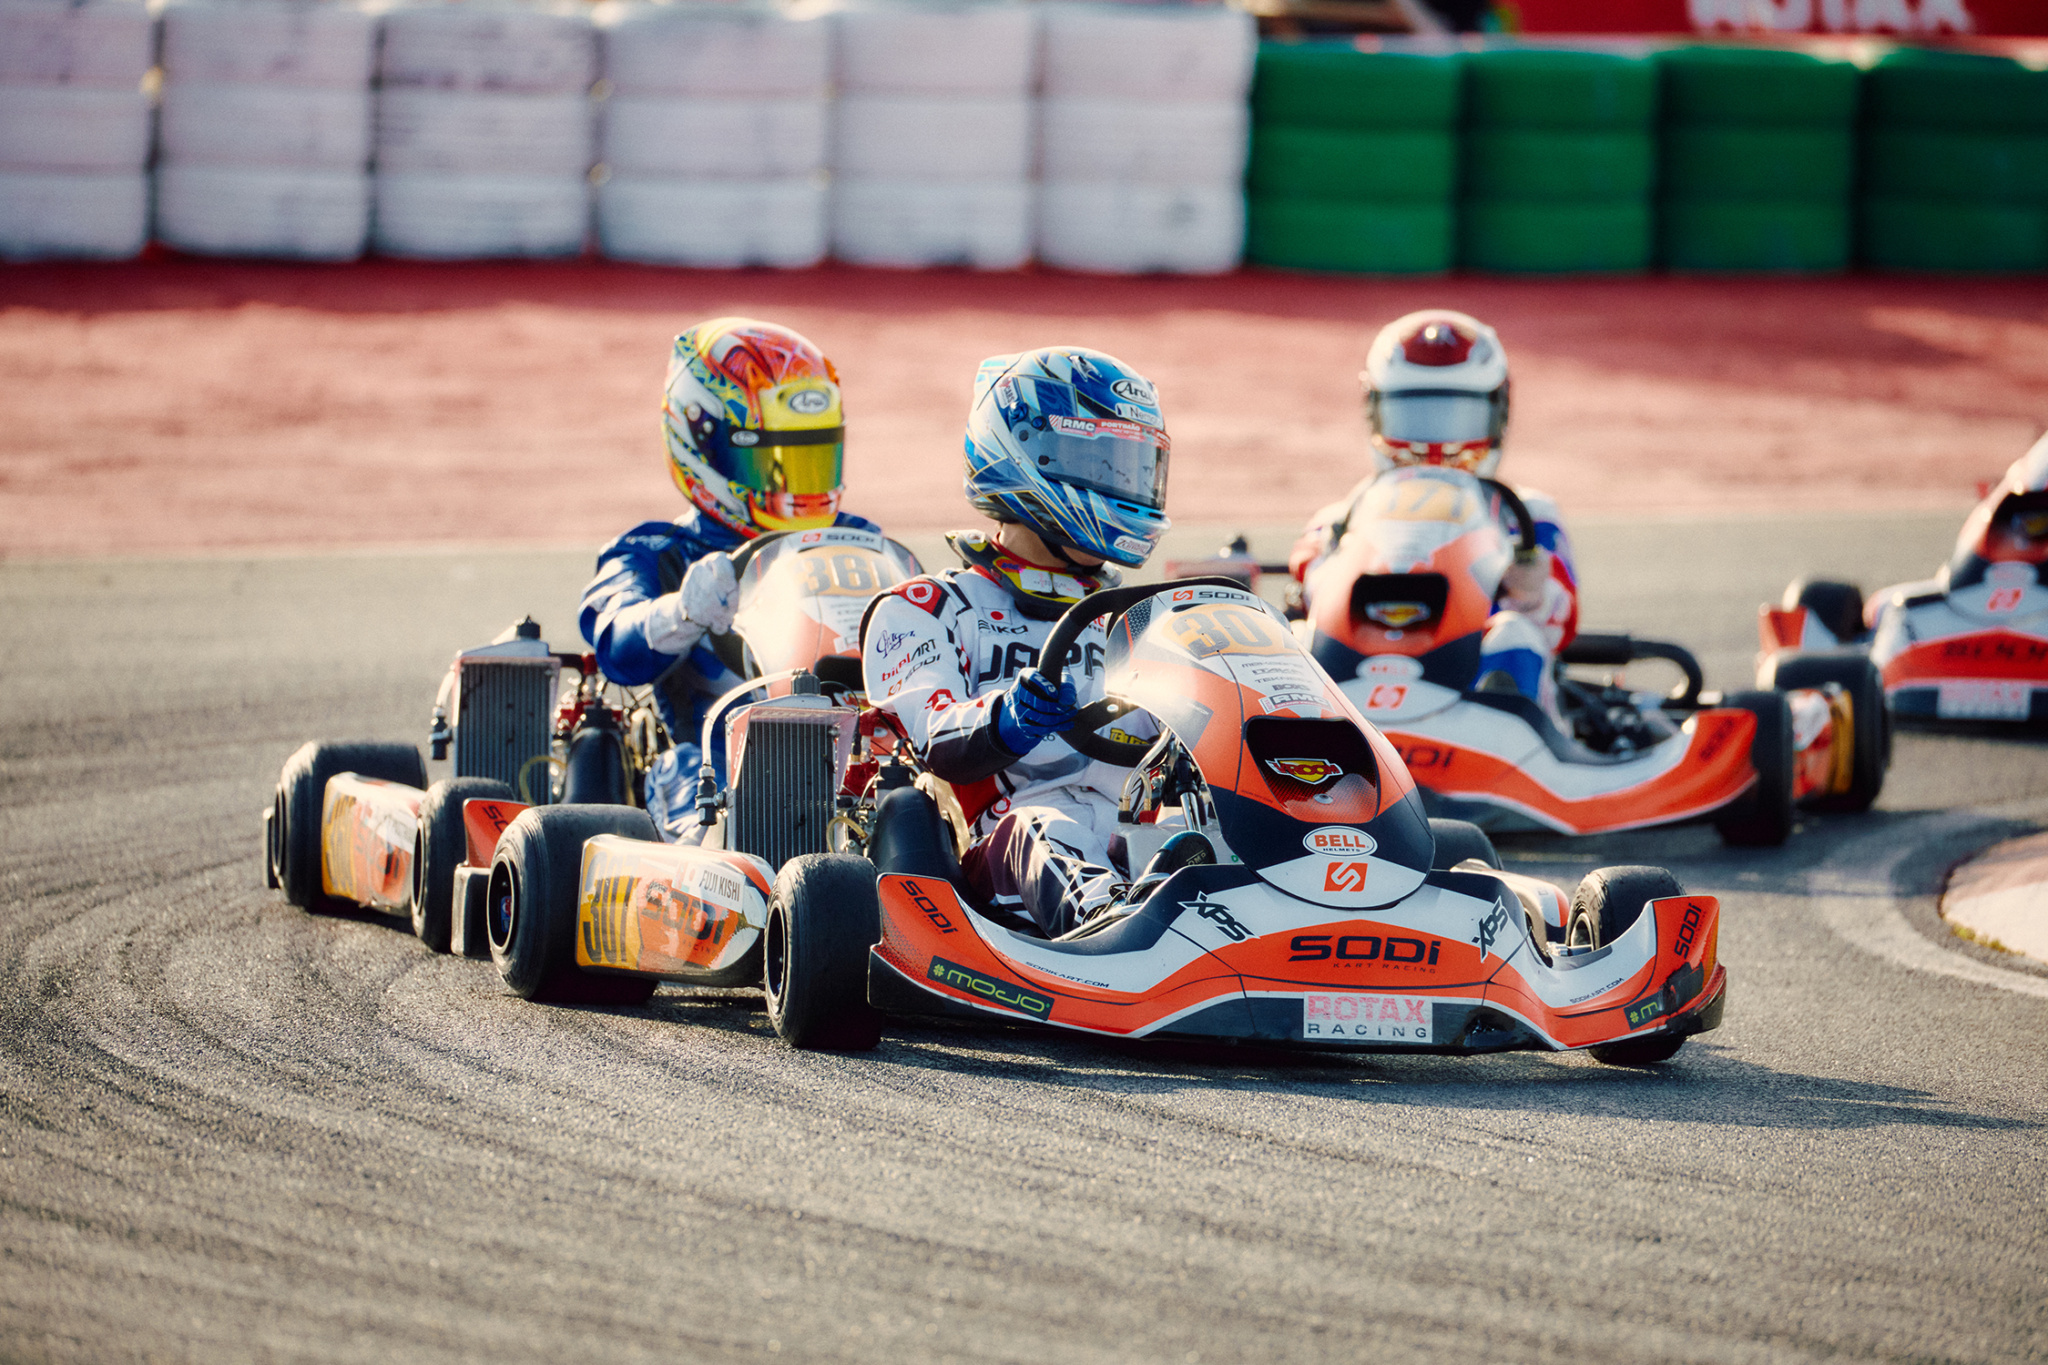 Rotax 125 Senior MAX at the RMC Grand Finals in Portimao